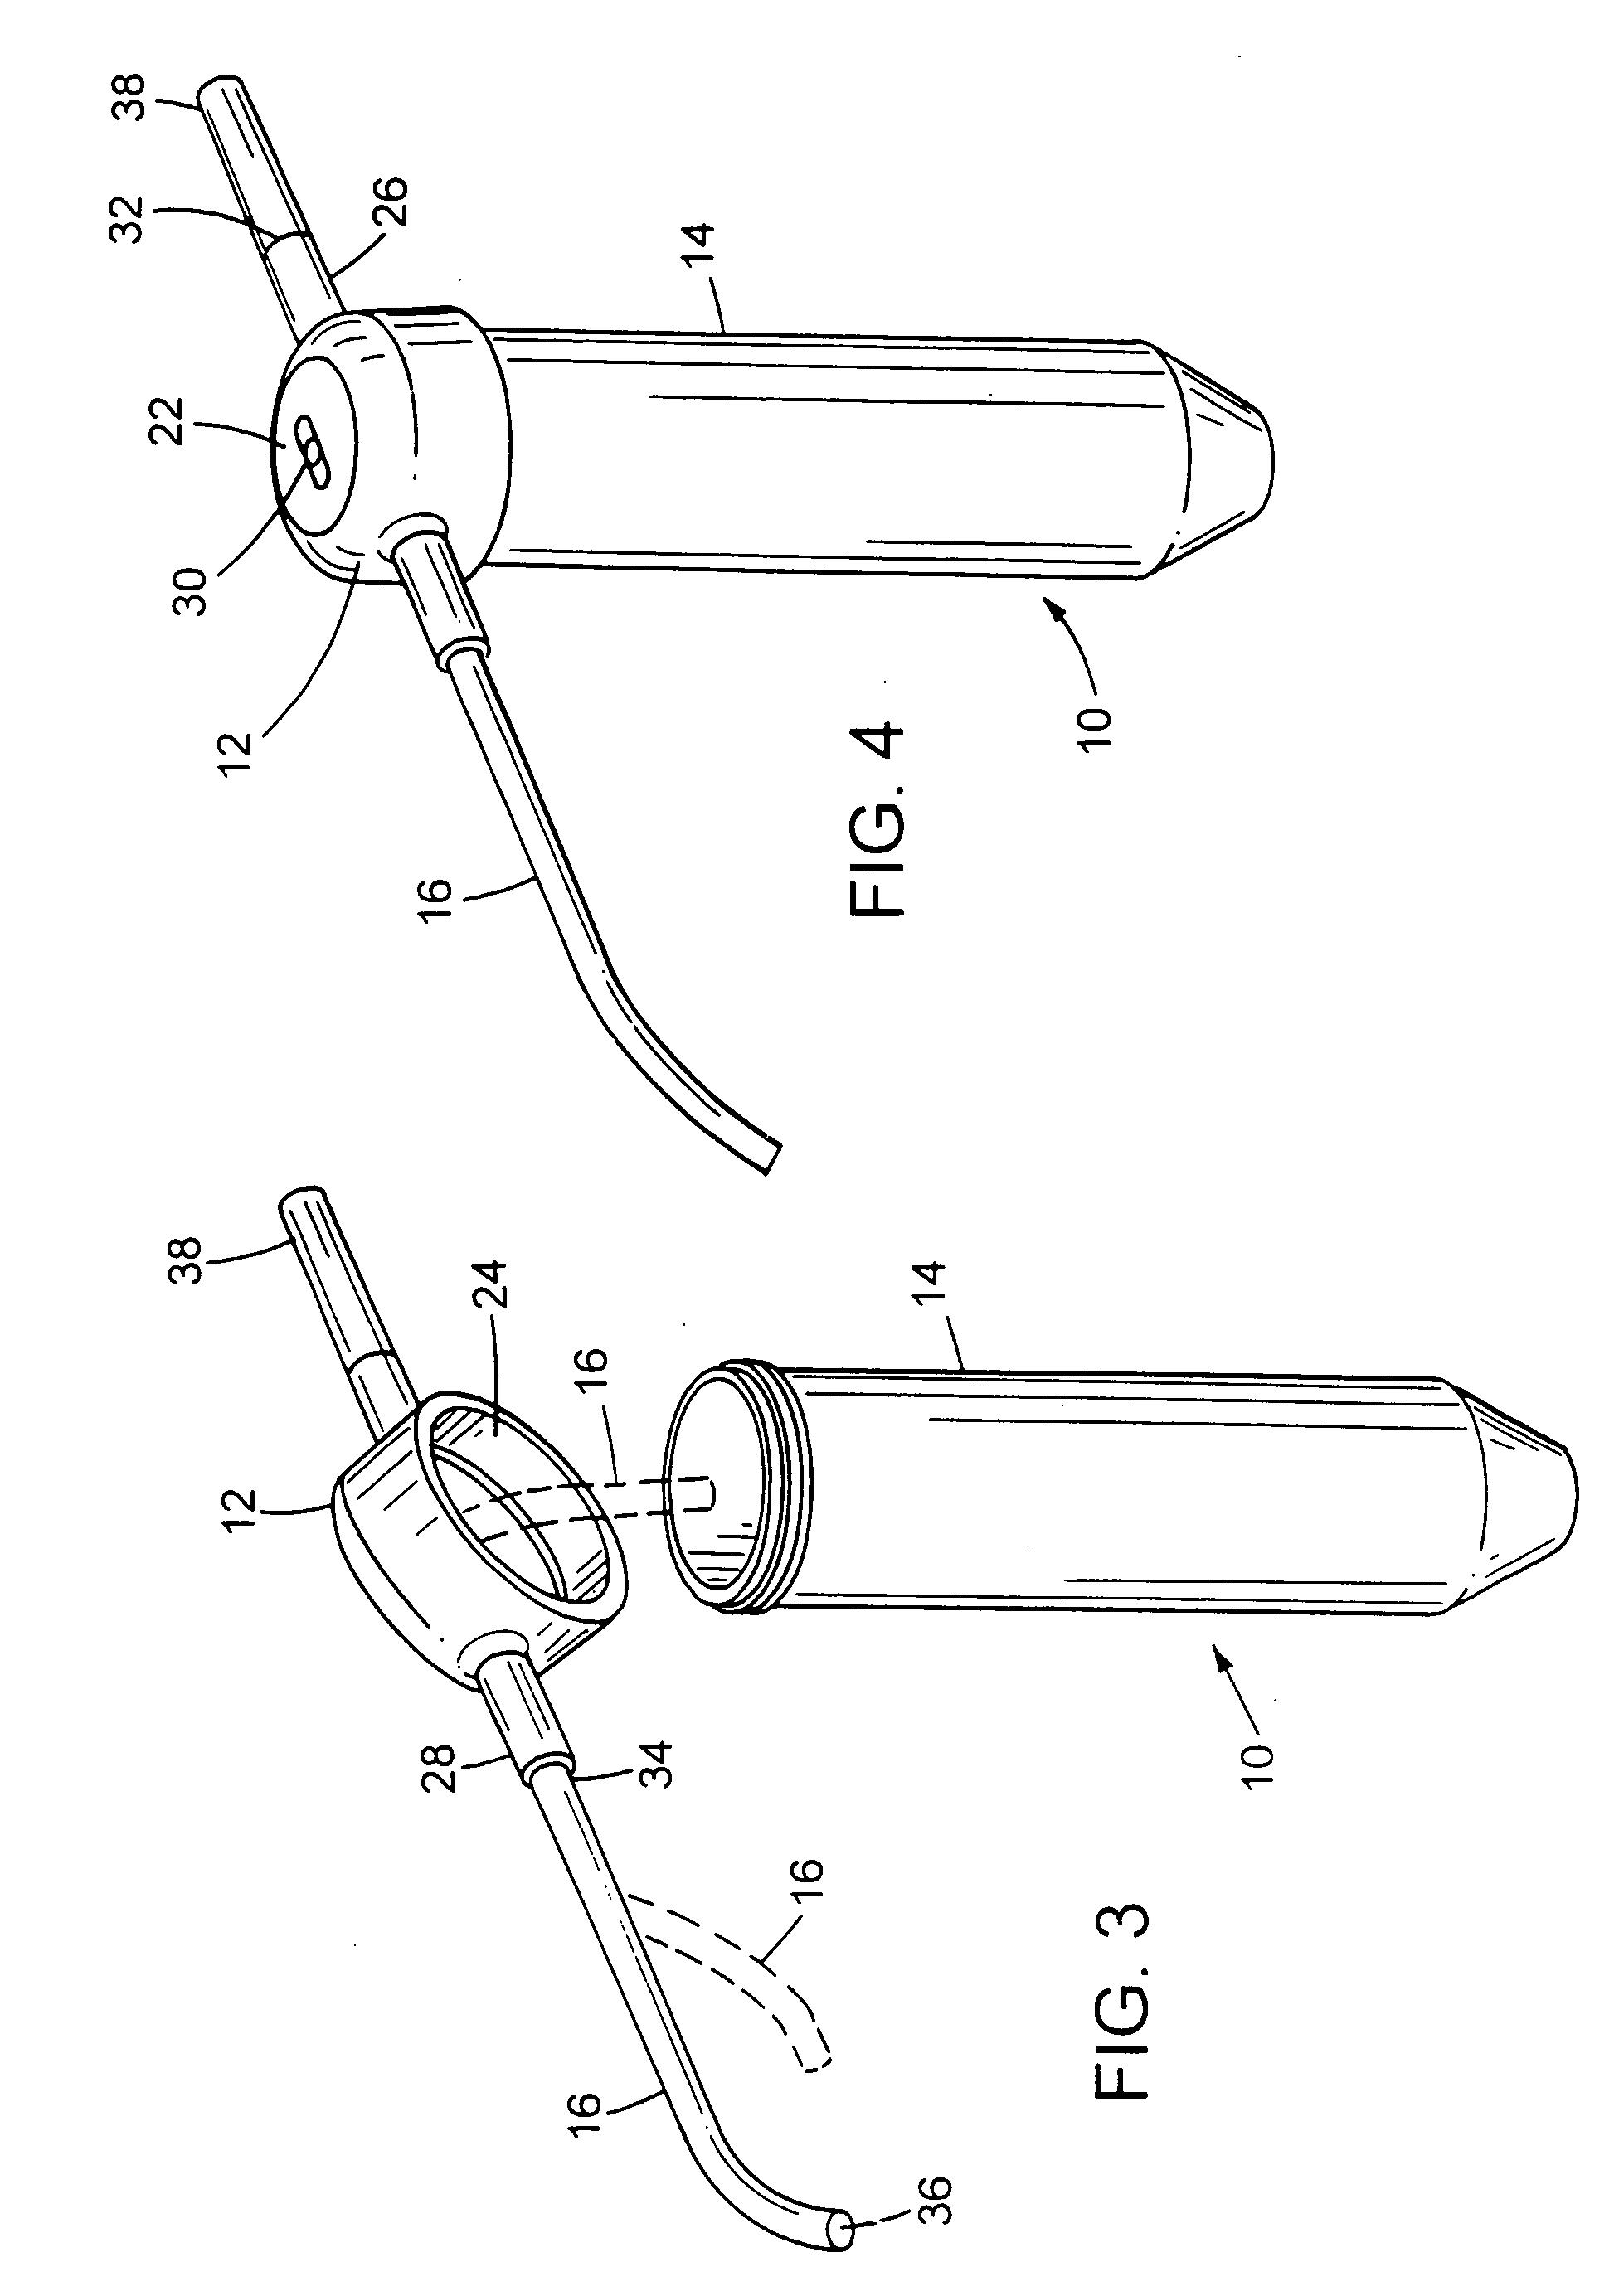 Methods and materials for treating and preventing inflammation of mucosal tissue